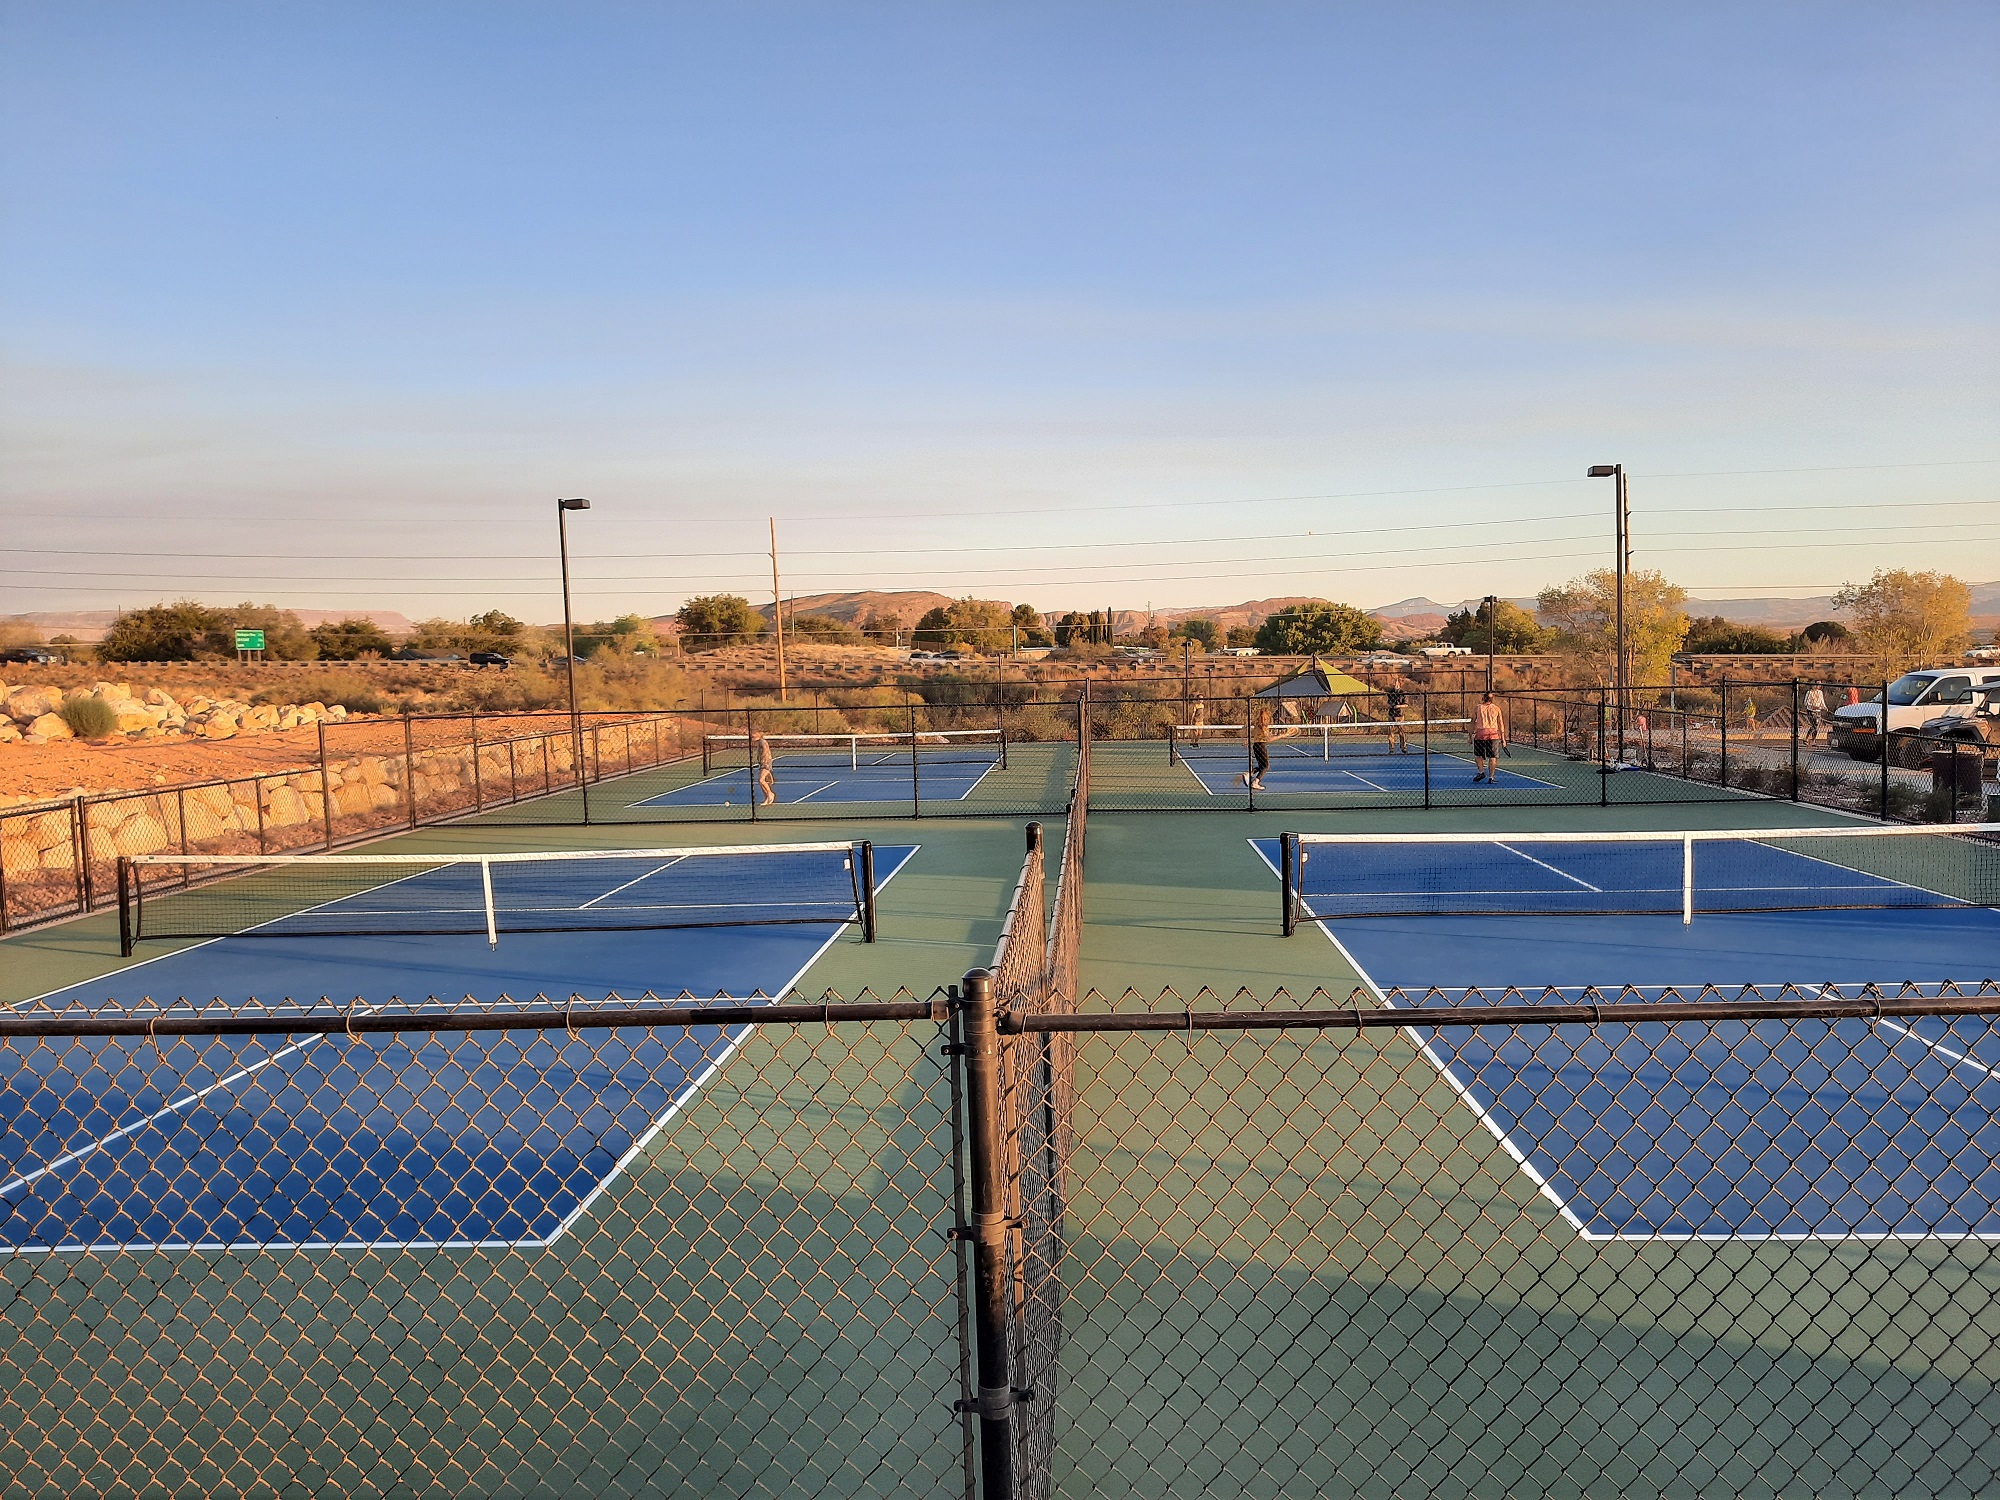 The tennis courts at the new Boilers Park in Washinton, Utah